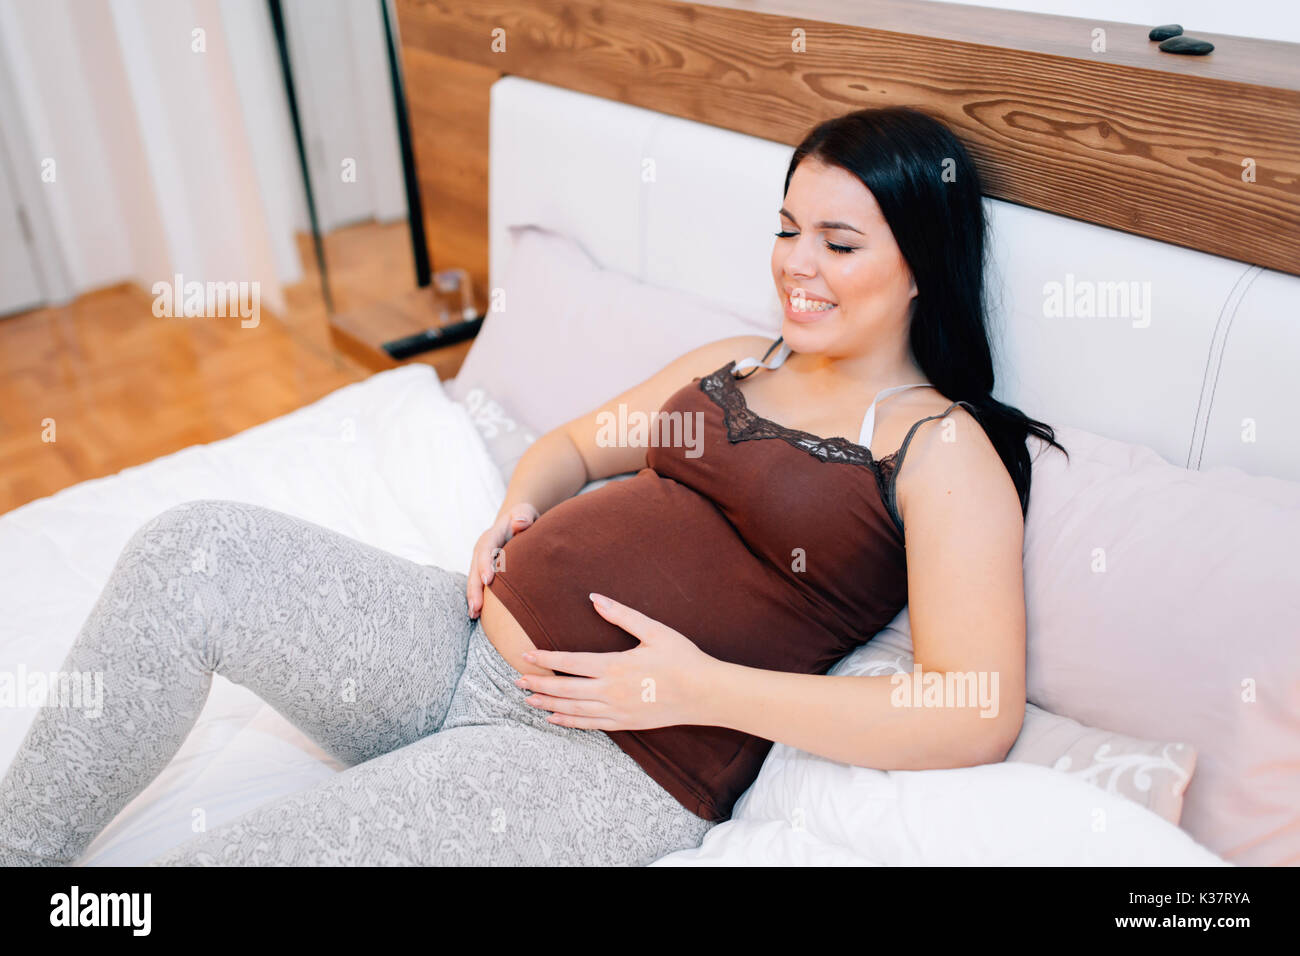 Pregnant woman in pain Stock Photo